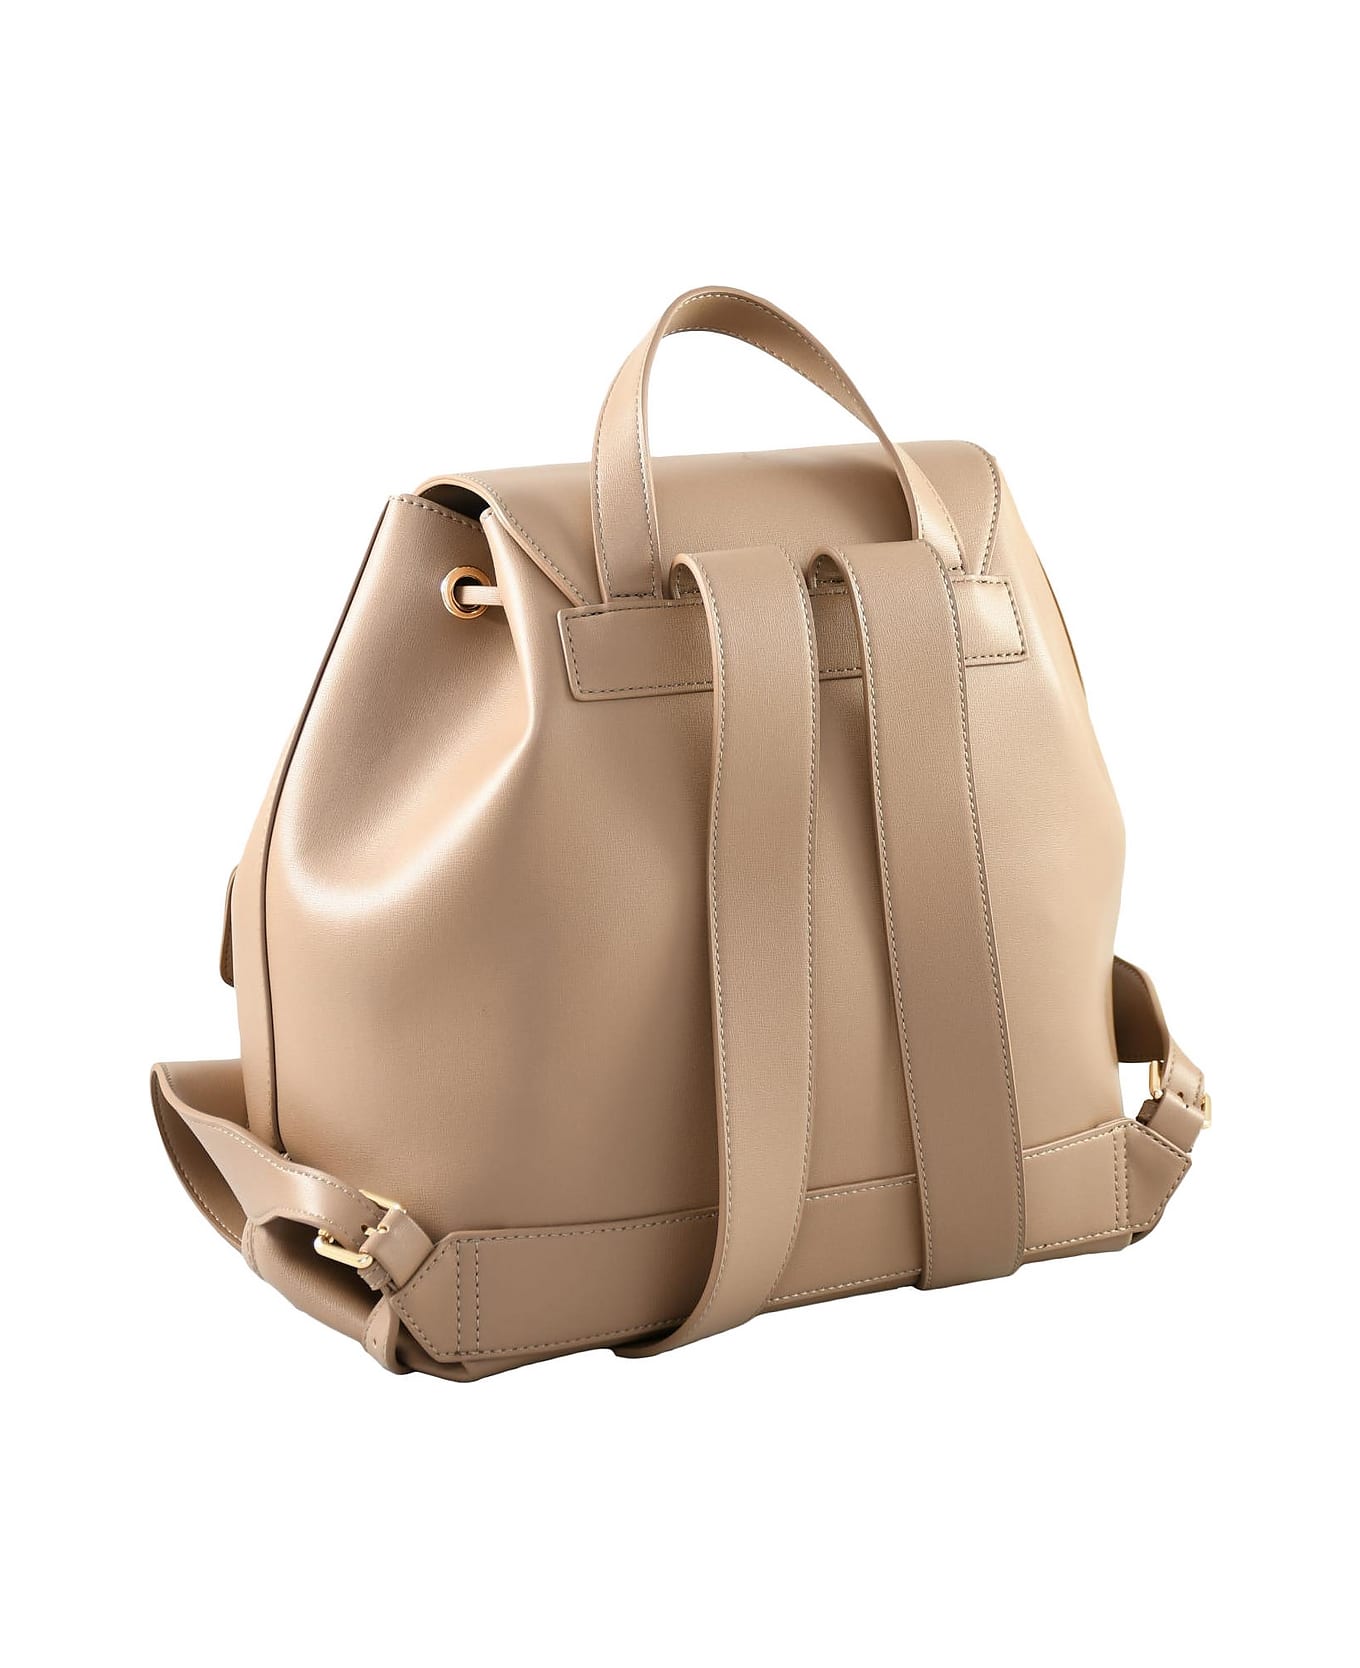 Manila Grace Women's Taupe Backpack - Taupe